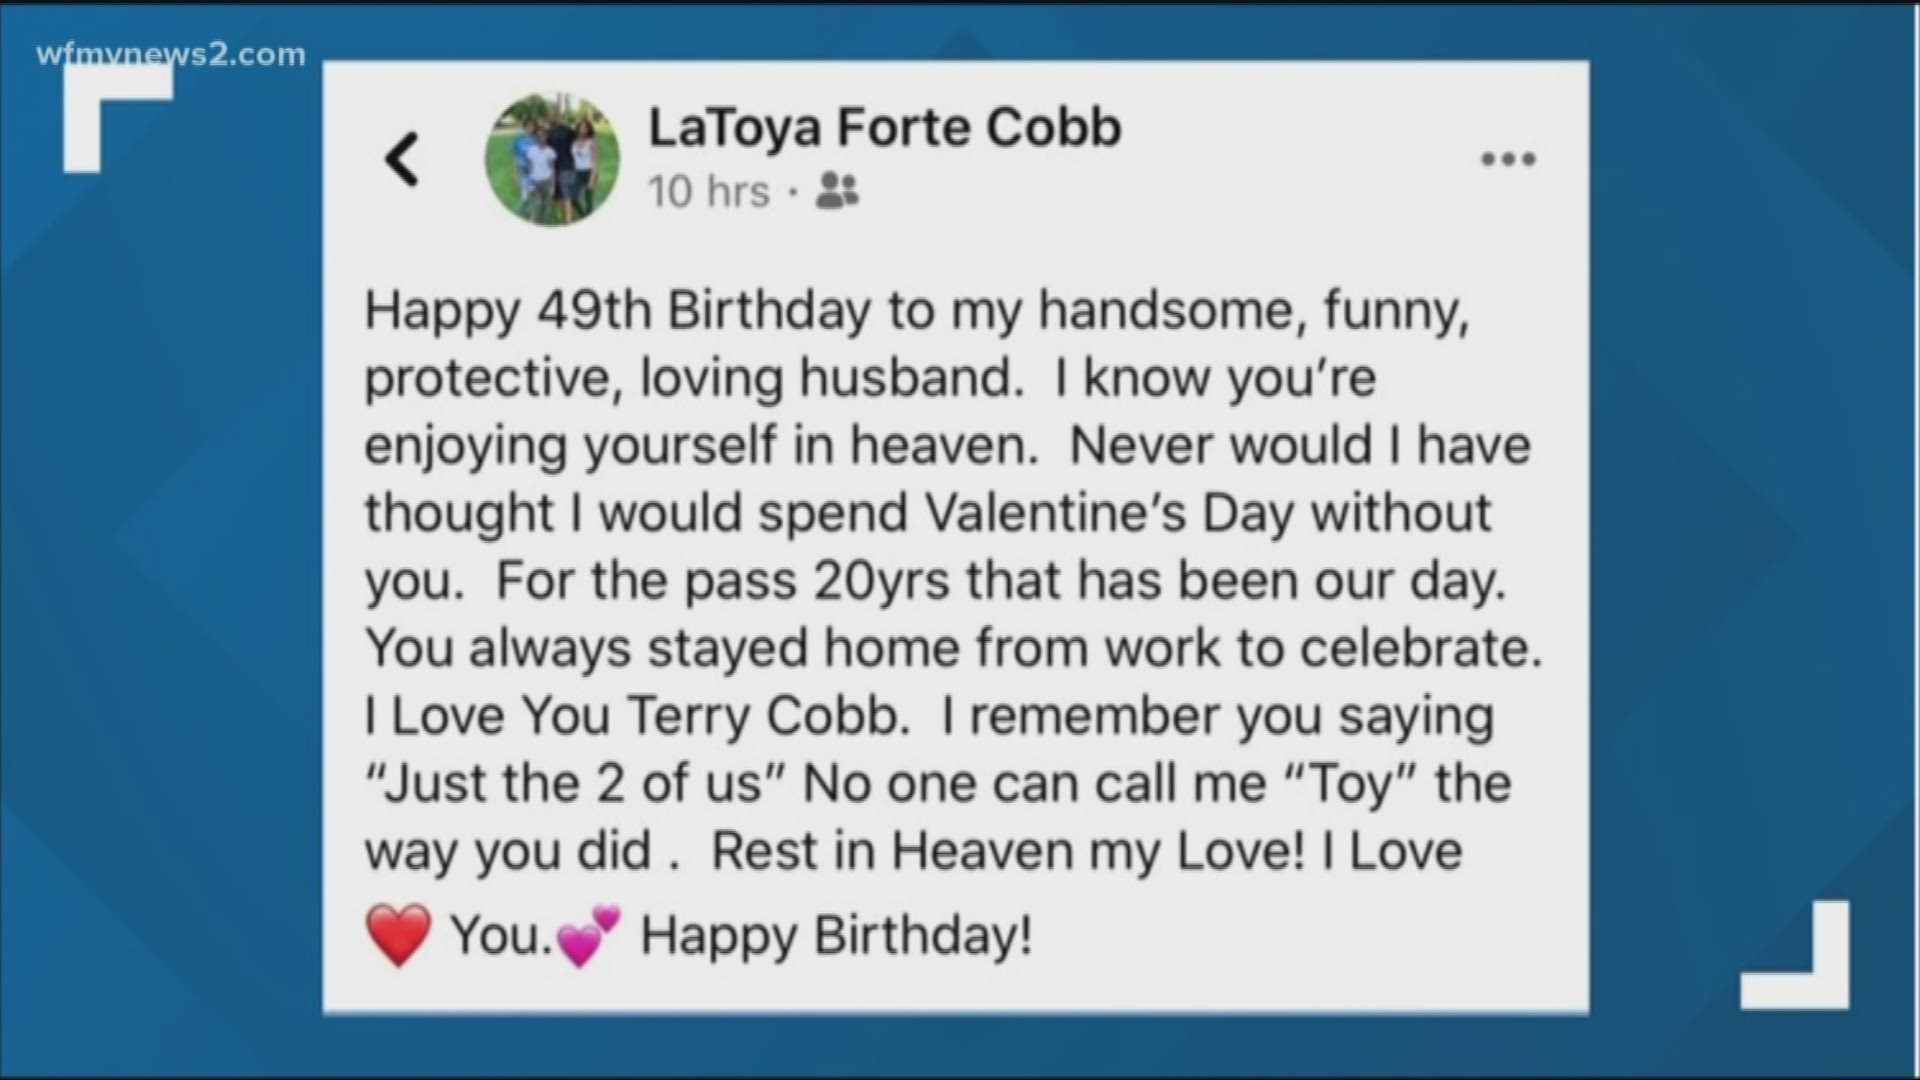 Latoya Forte Cobb never thought she would spend Valentine's Day without her soulmate. Now she and her family are honoring him.